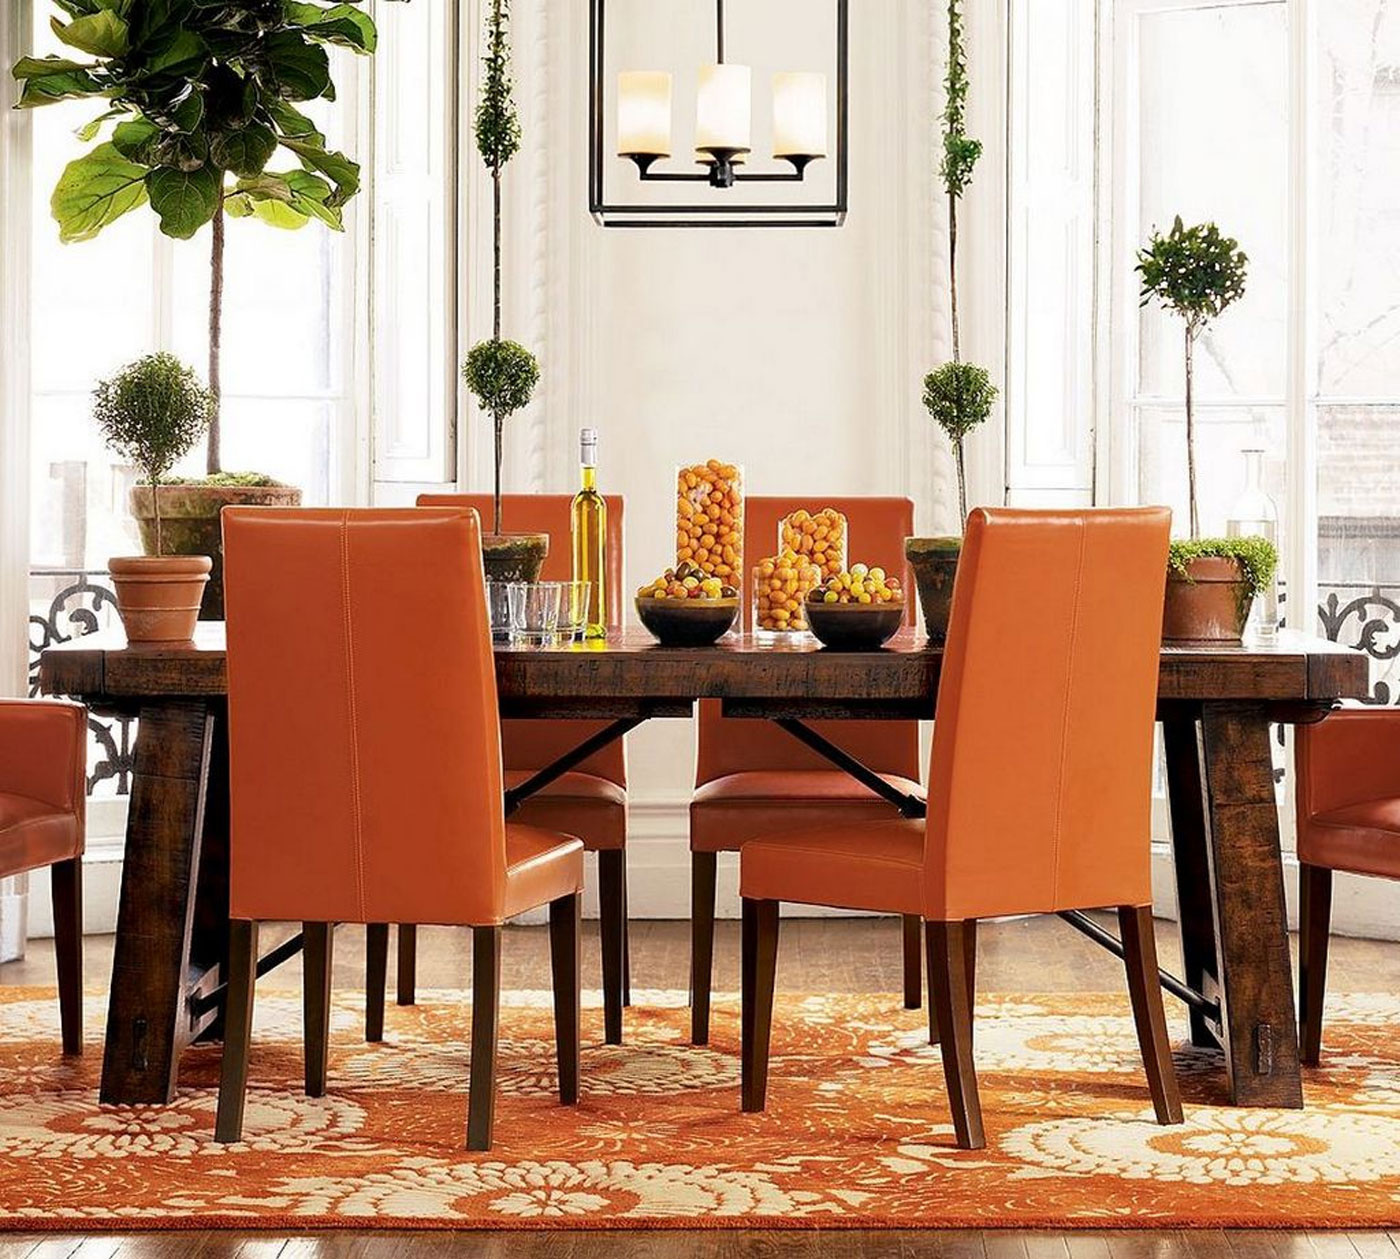 Dining Room 6 Rusting Dining Room Furniture Tables 6 Design Ideas With Exciting Orange Colored Chairs Design And Classy Dark Brown Wooden Table Ideas Also Fresh Bowl Of Fruit And Flower Vase Idea Dining Room Modern Dining Room Furniture Design